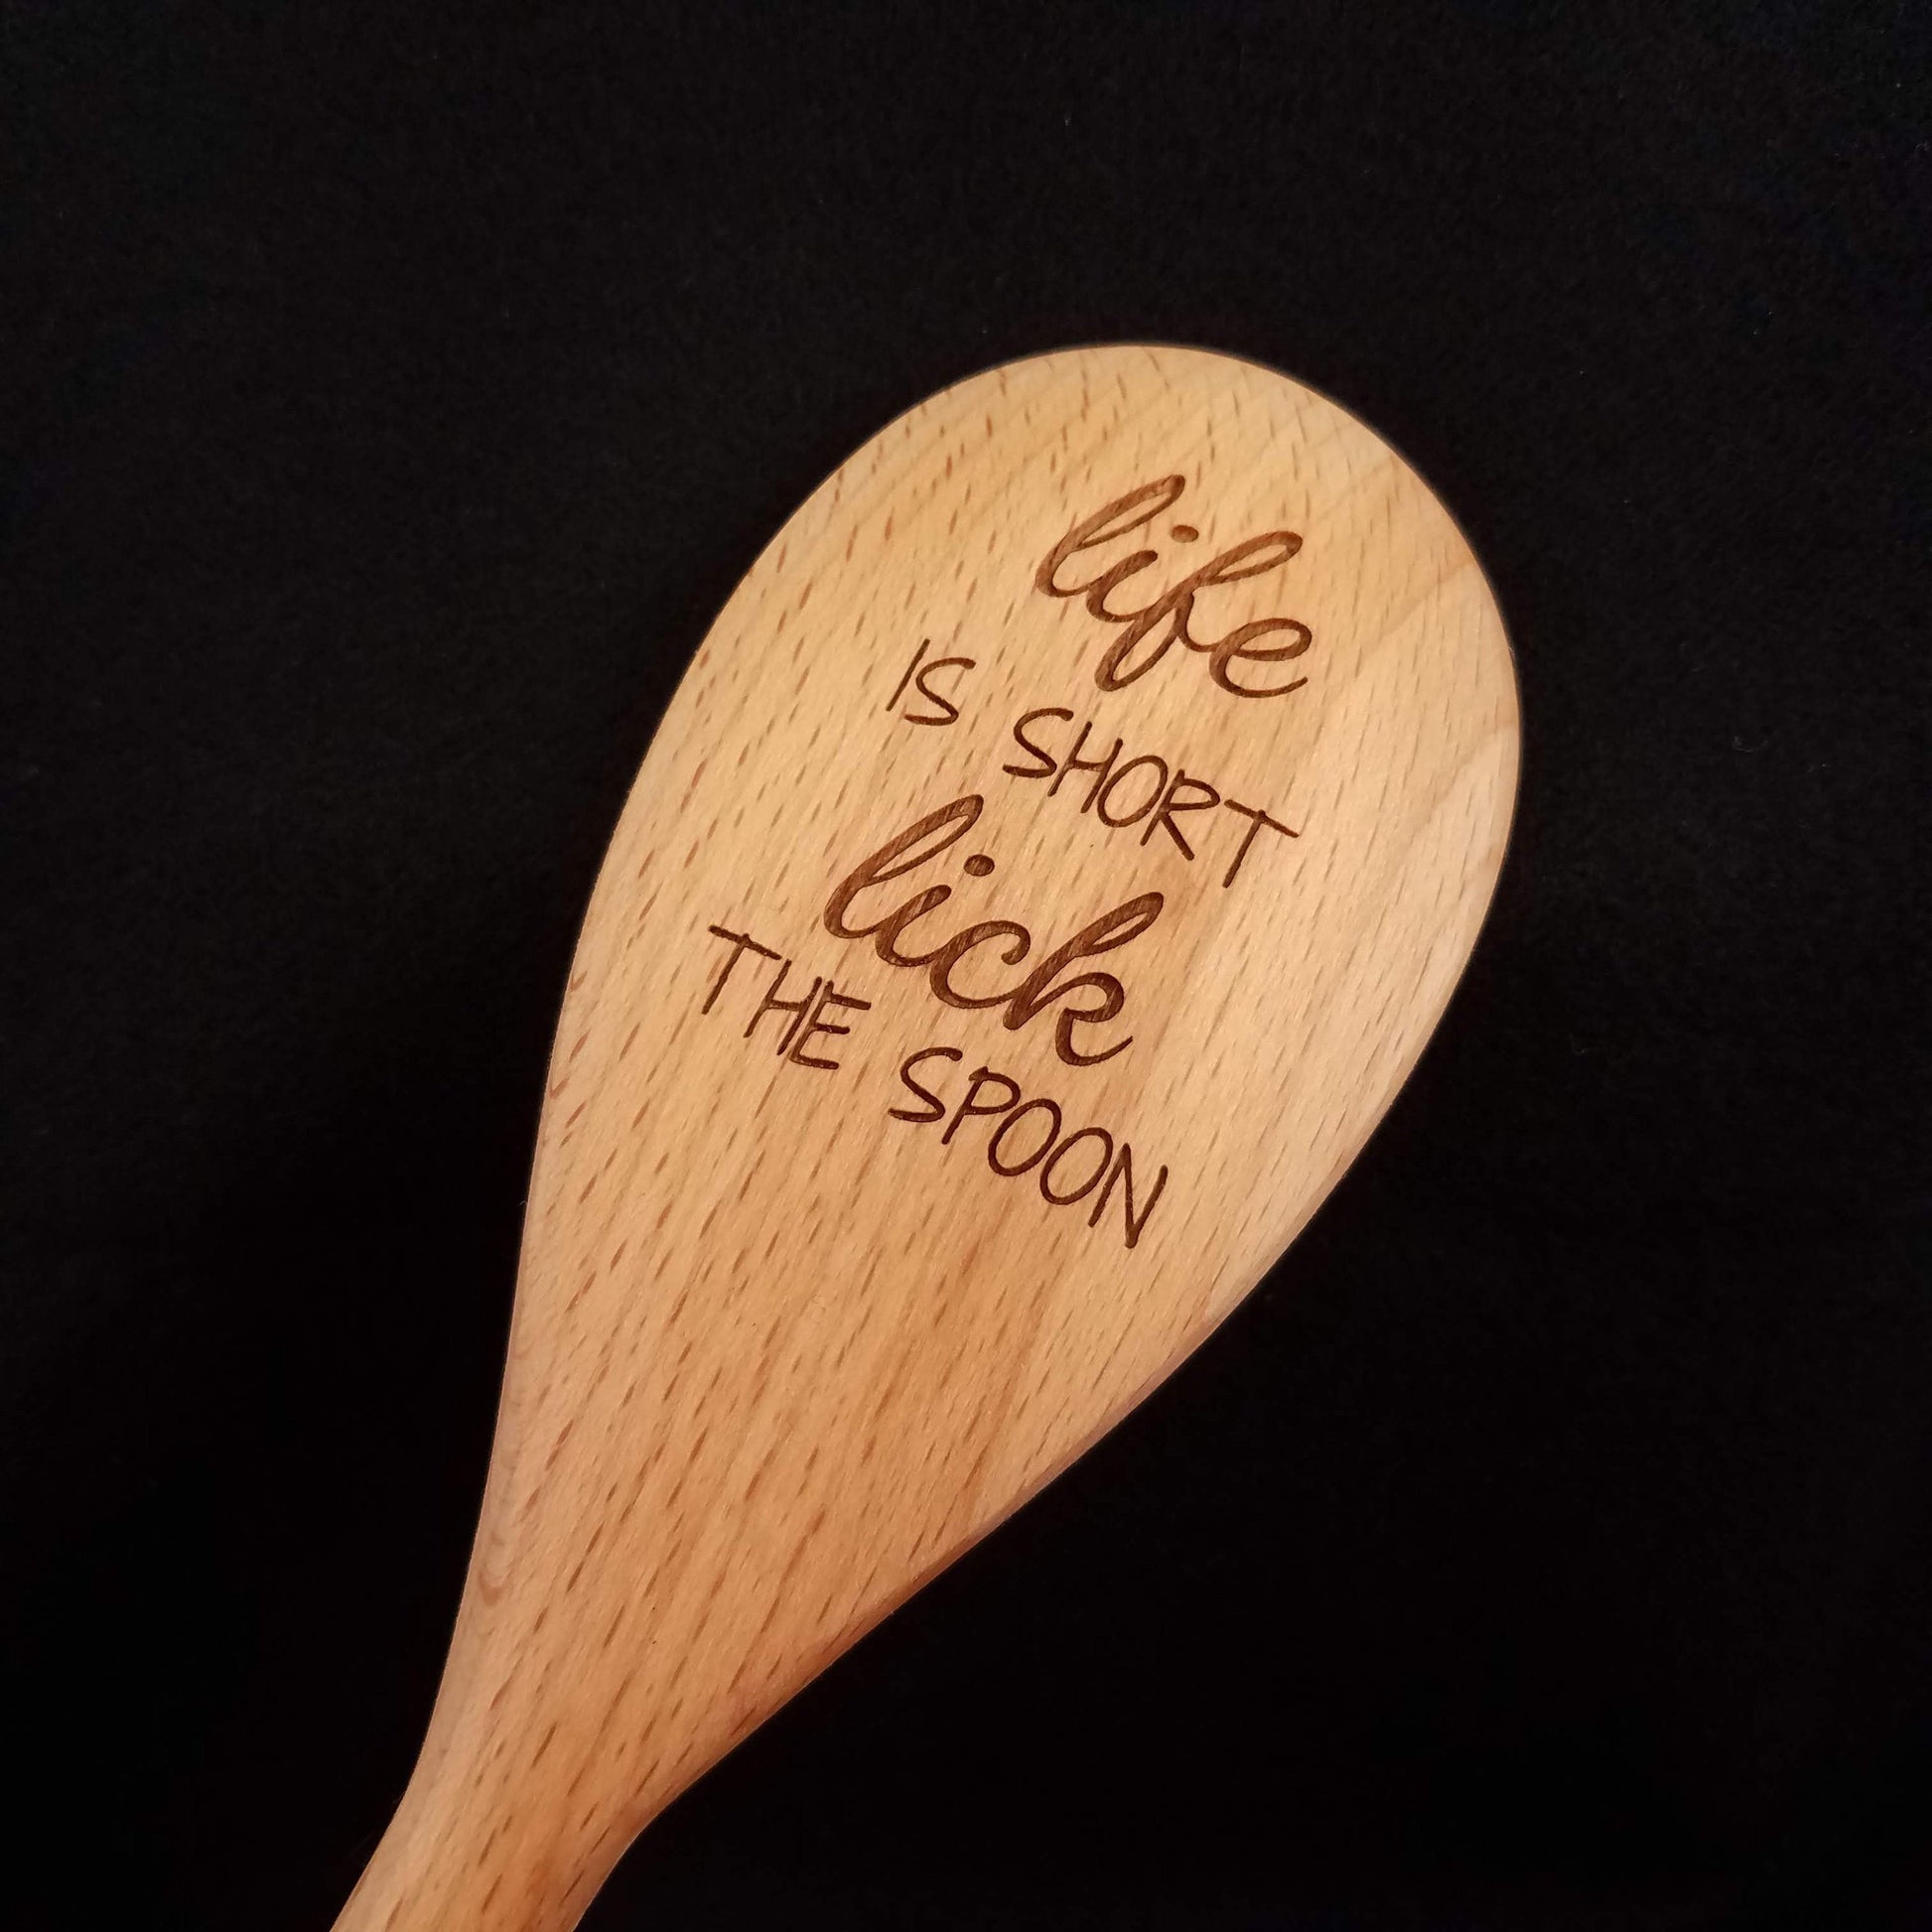 Beech wood spoon laser engraved with Life is Short Lick the Spoon